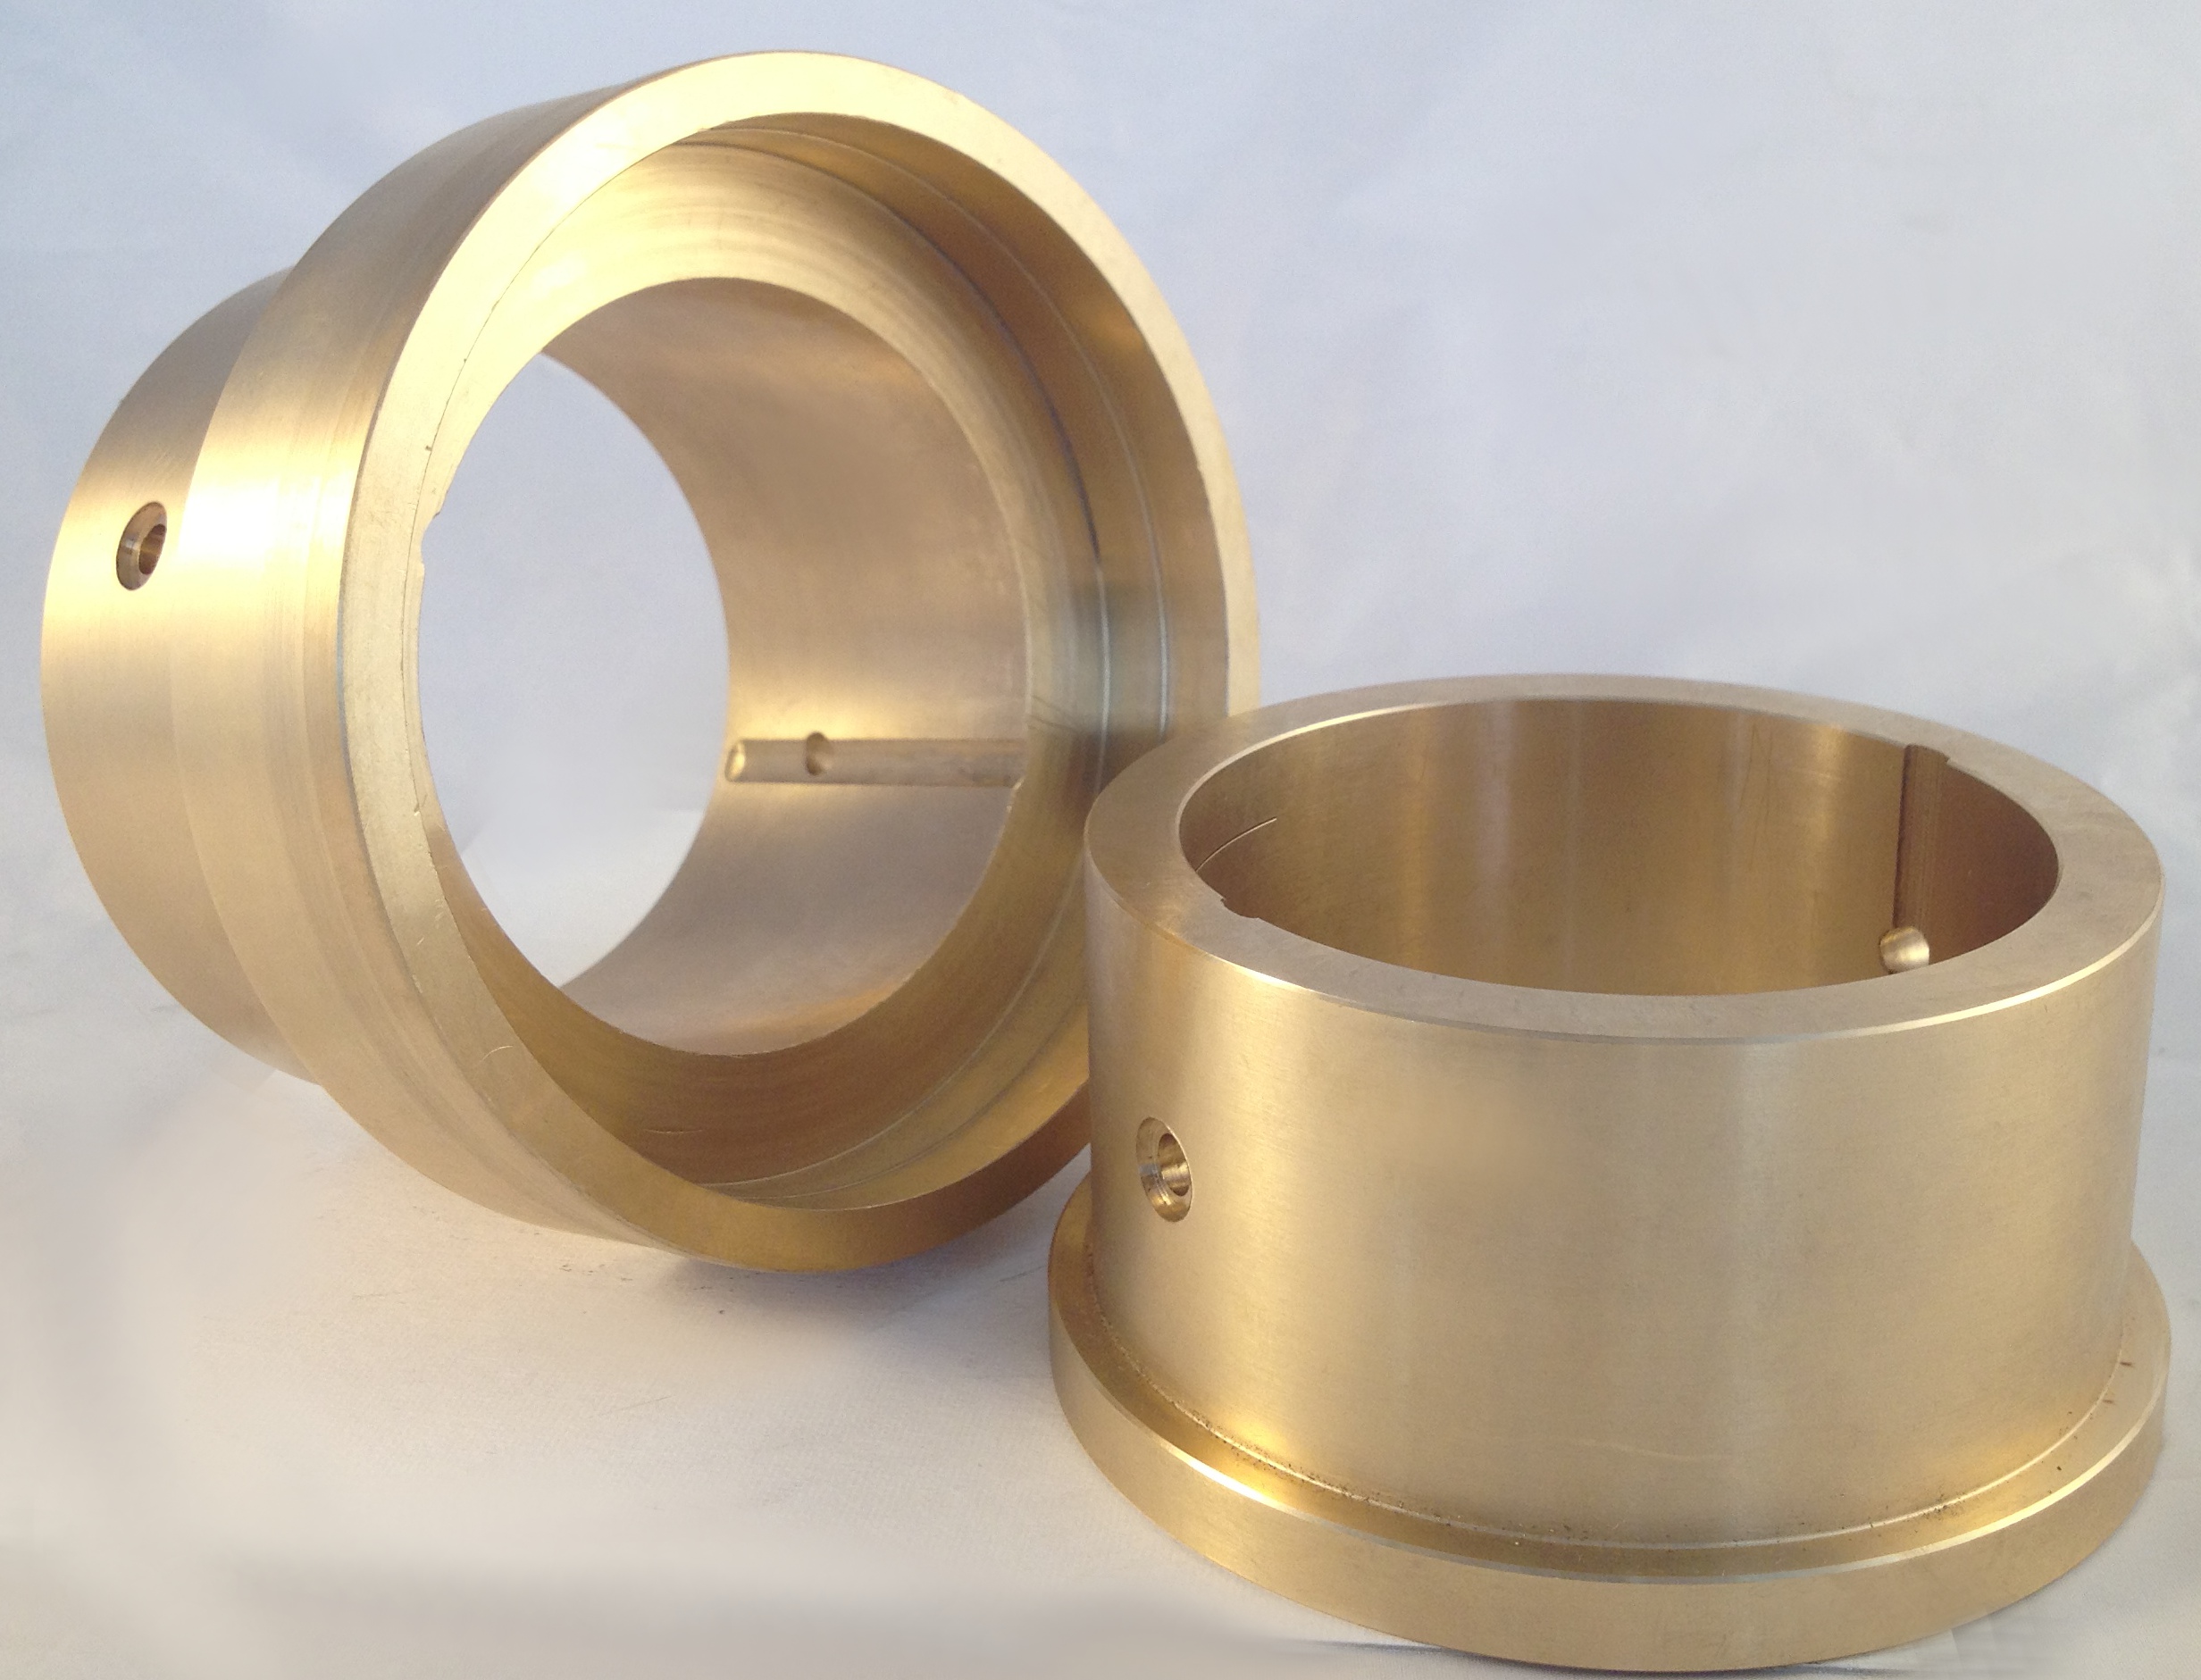 Why Don't You Stock C93700 SAE 64 Bearing Bronze? - National 